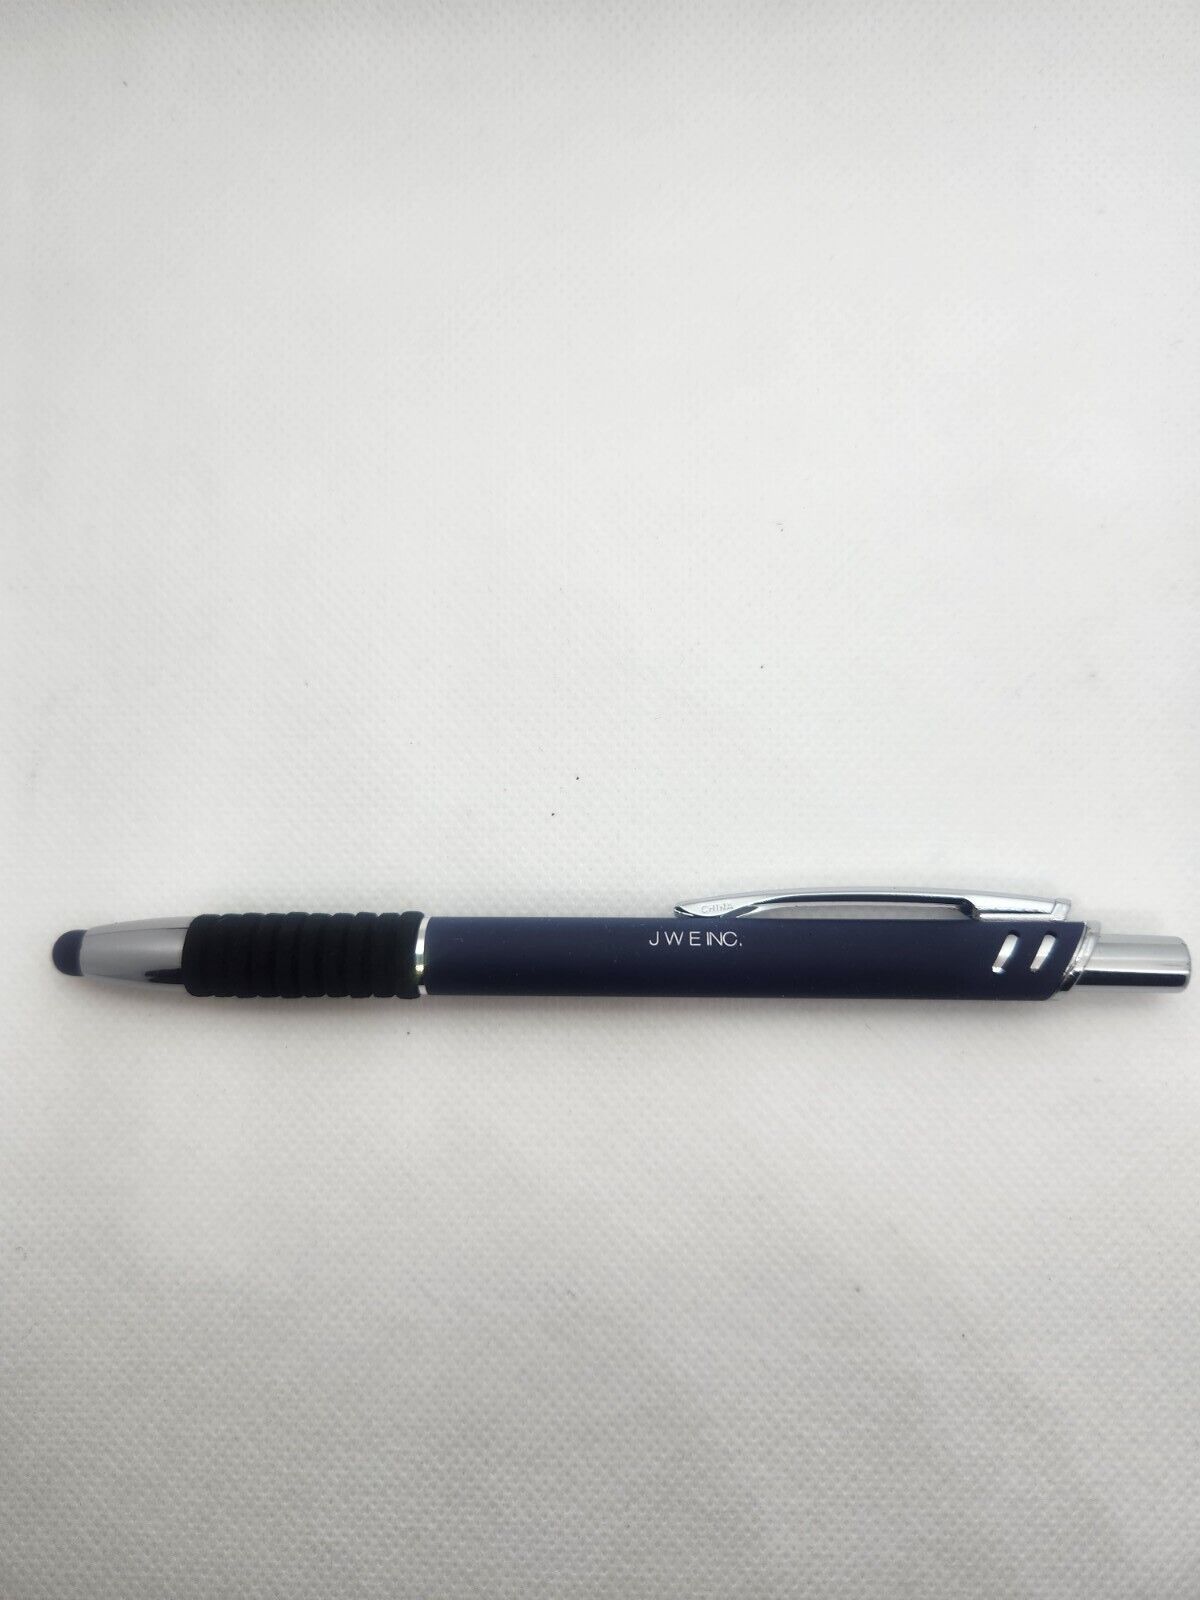 Stylus-pen; Soft Touch ALEGRIA PEN with Foam Grip and Stylus tip,  by JWE Inc. 